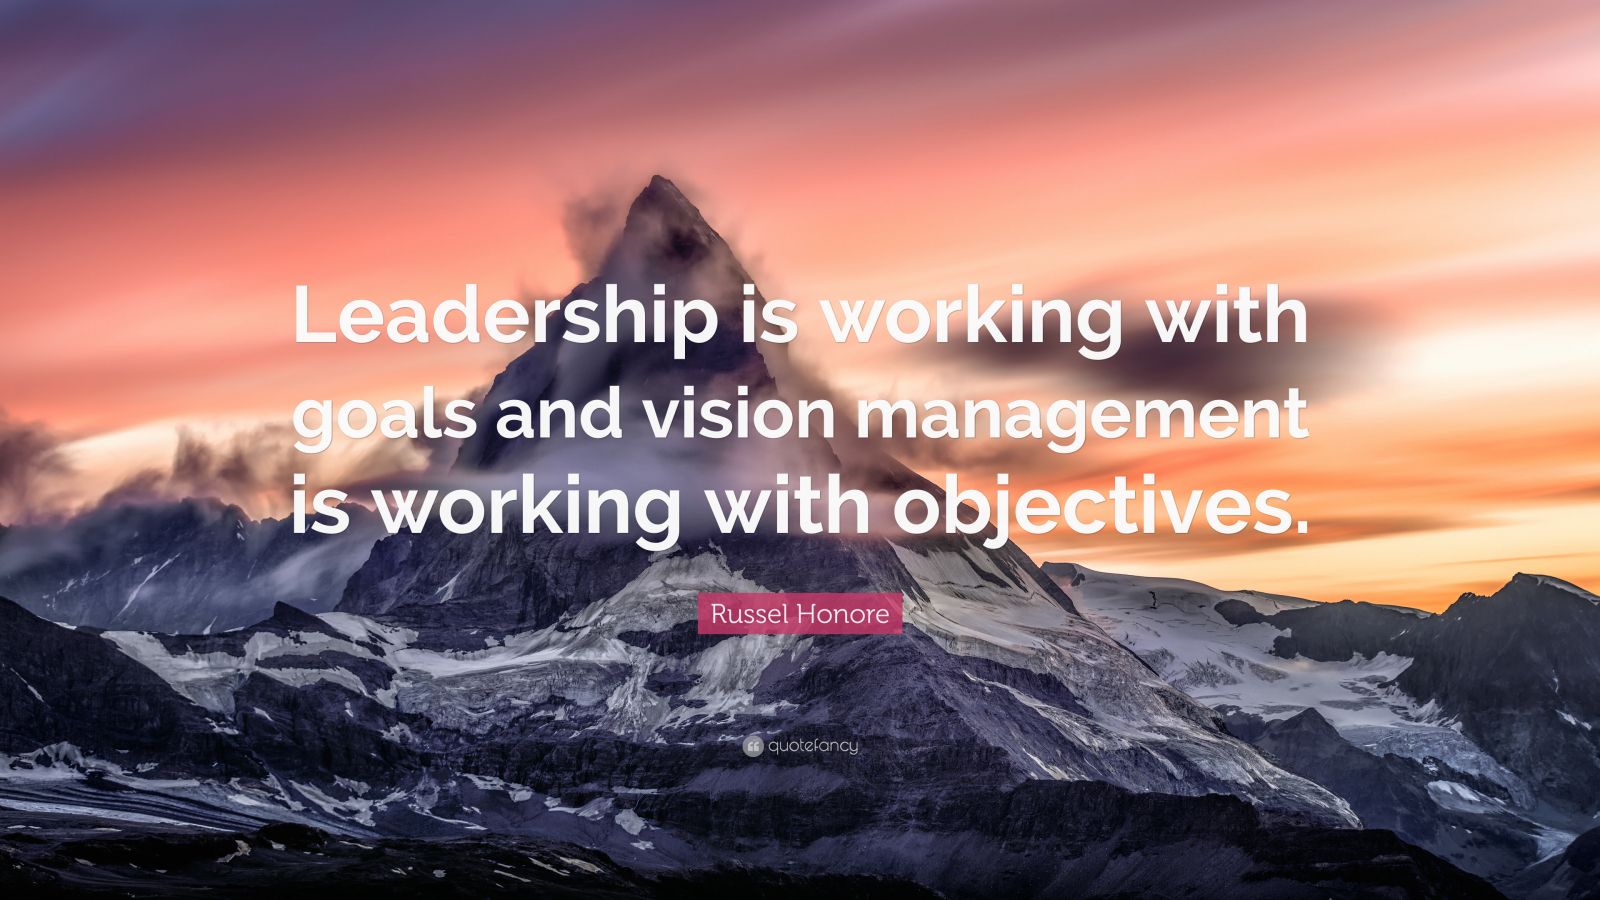 Russel Honore Quote: “Leadership is working with goals and vision